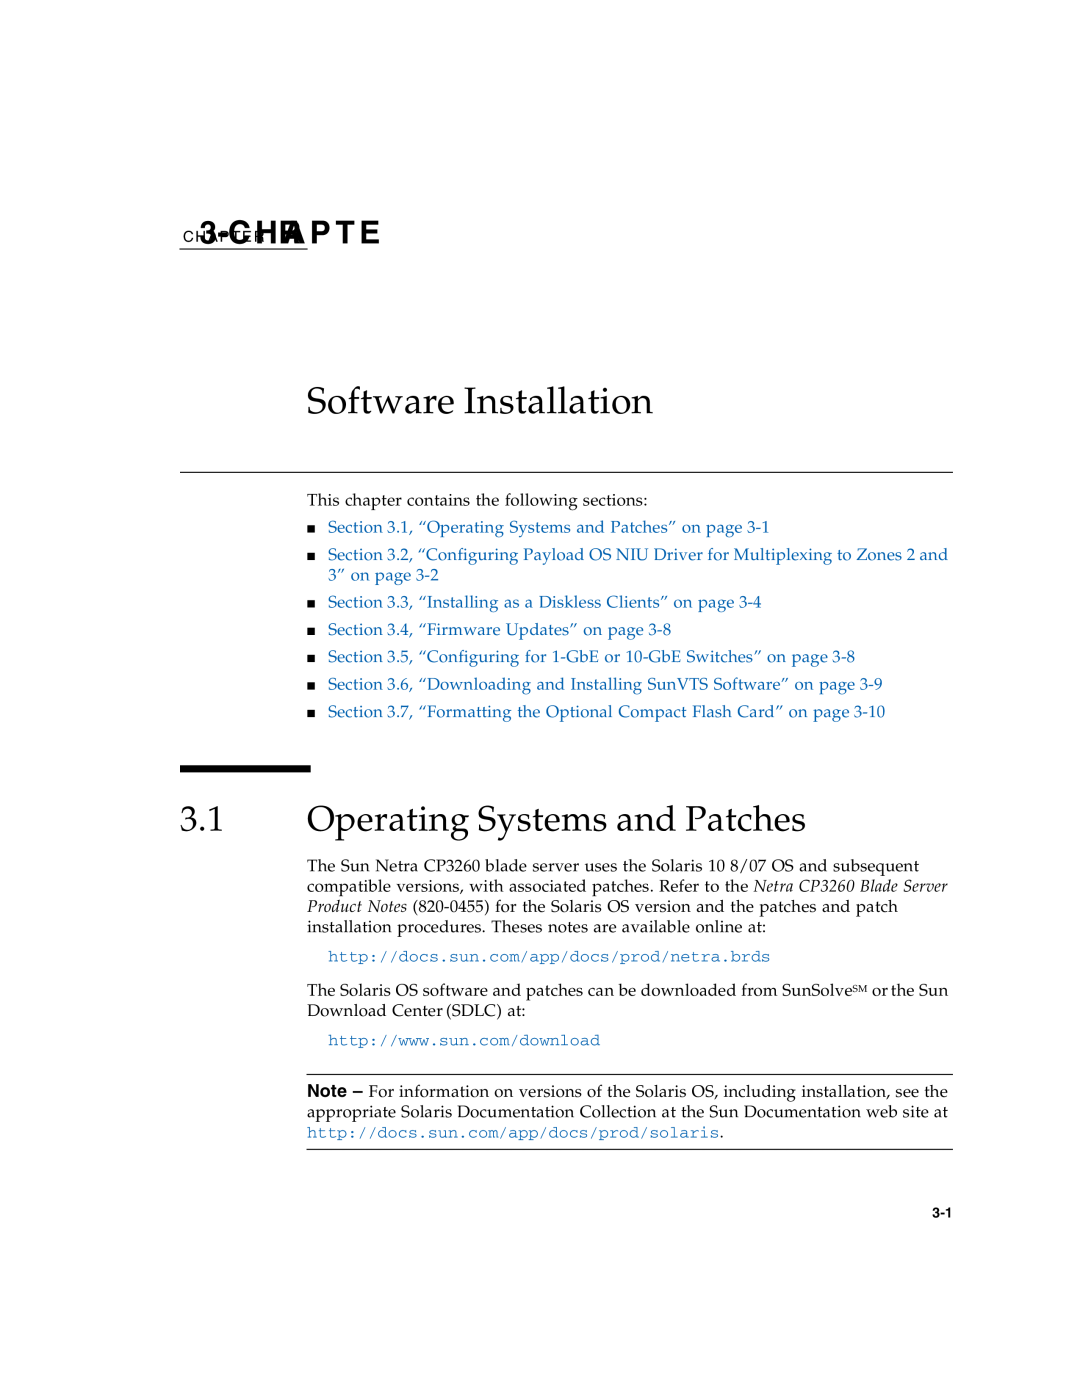 Sun Microsystems CP3260 manual Software Installation, Operating Systems and Patches, C H3A-PCT E RHRA P T E 